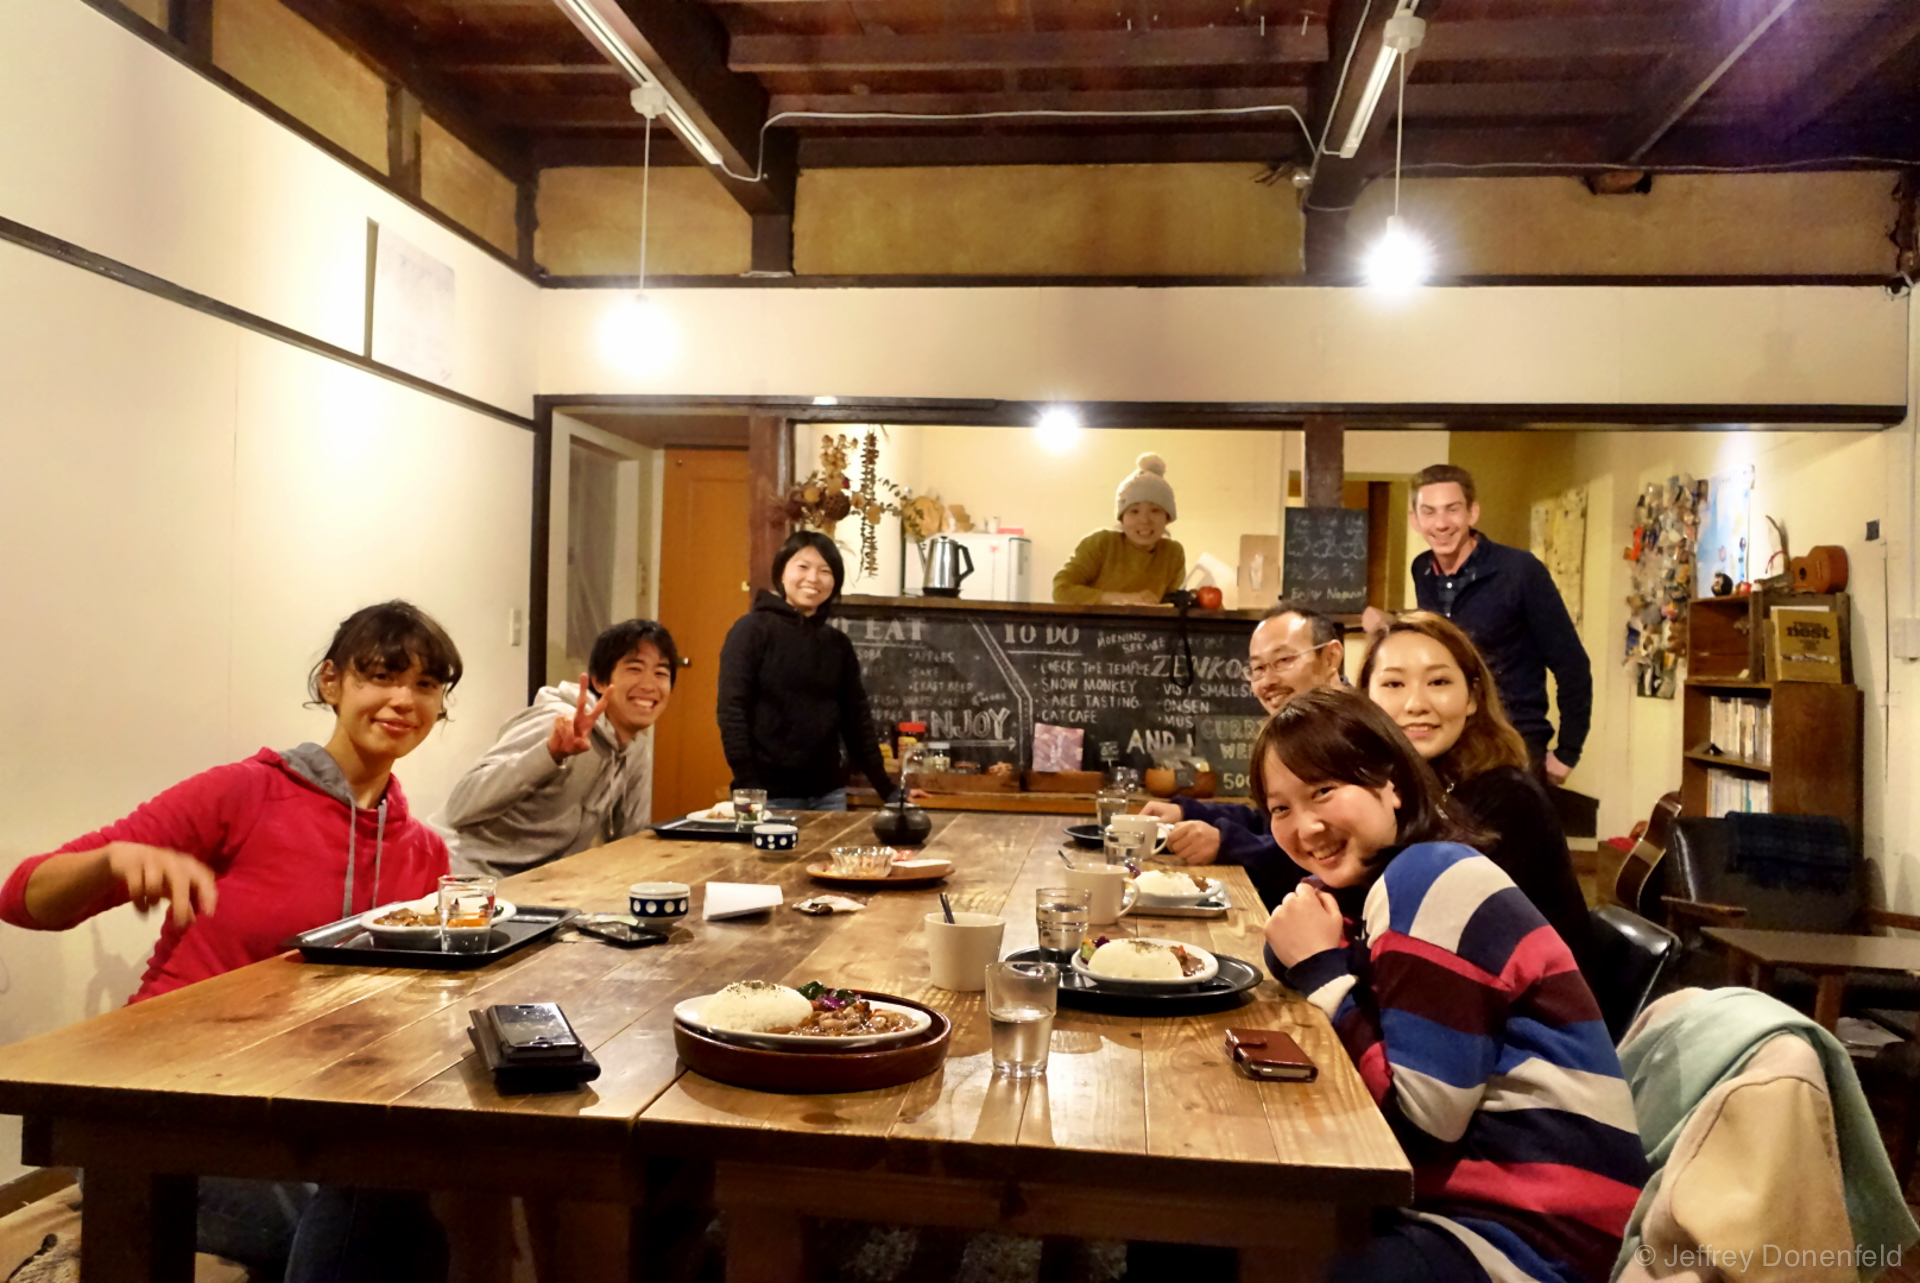 My wonderful group at the 1166 Backpackers hostel I stayed at in Nagano, Japan.